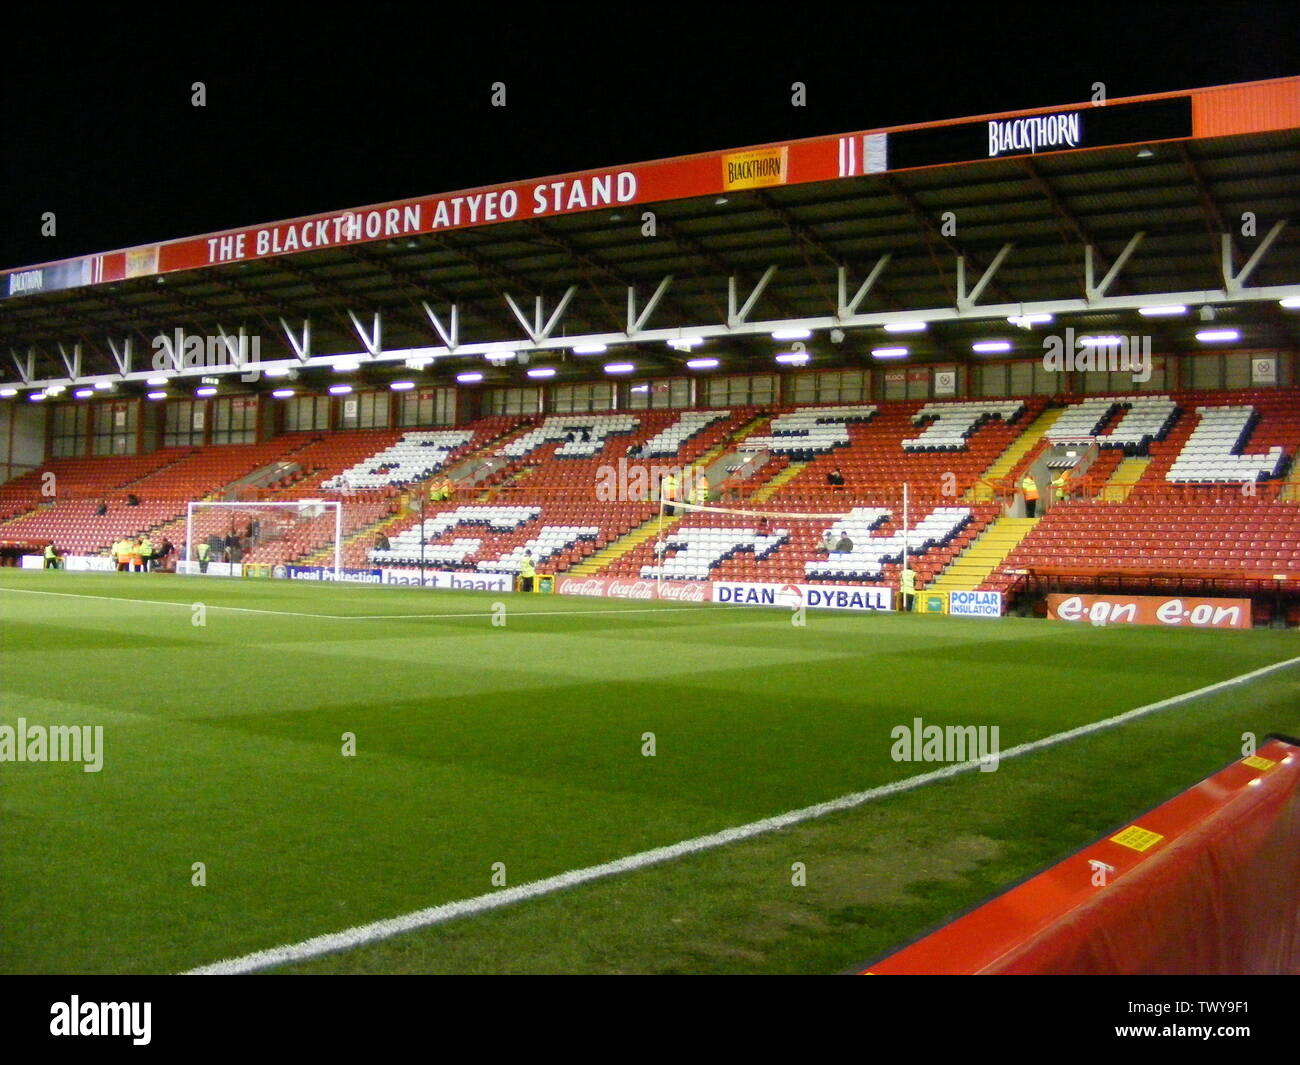 The Atyeo stand of the Ashton Gate Stadium; 9 April 2010 (original upload date); I (Tom Shorey) created this work entirely by myself.; Tomshorey at English pedia; Stock Photo